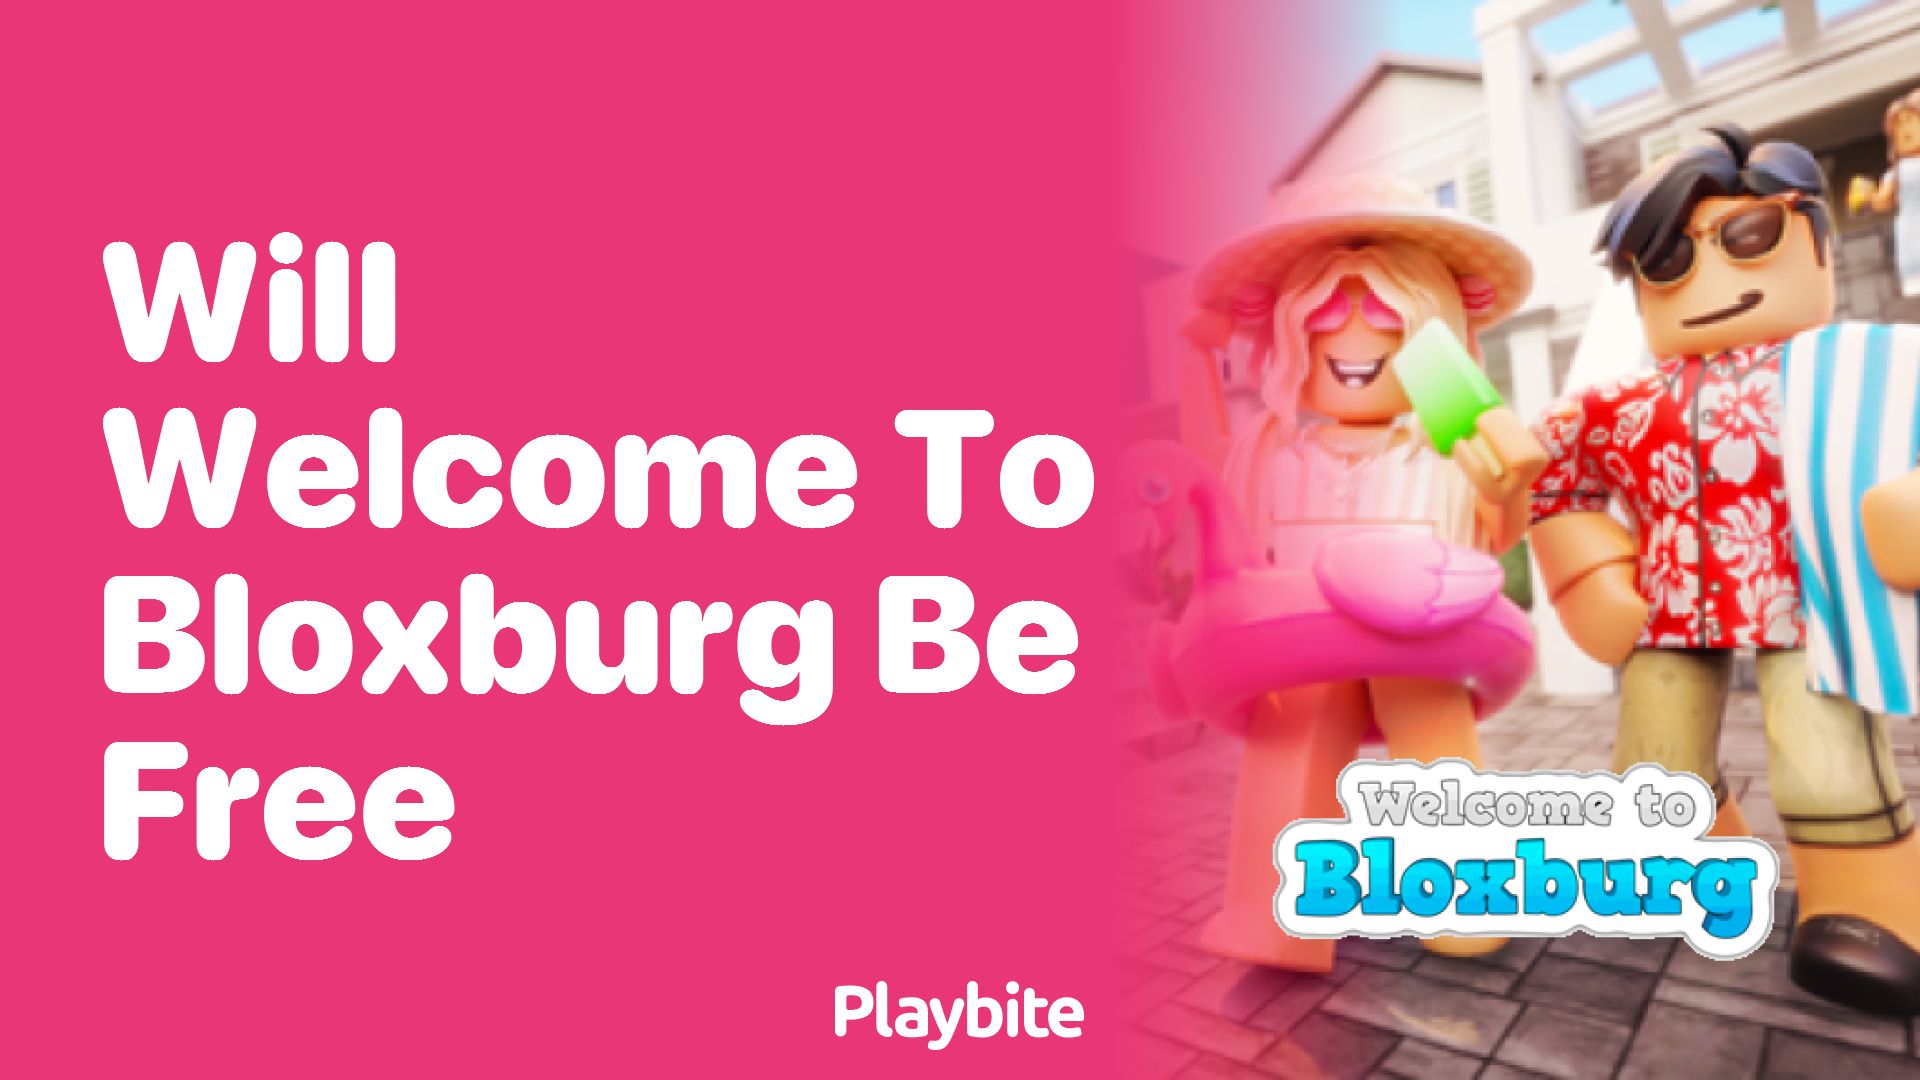 Will Welcome to Bloxburg Be Free to Play?